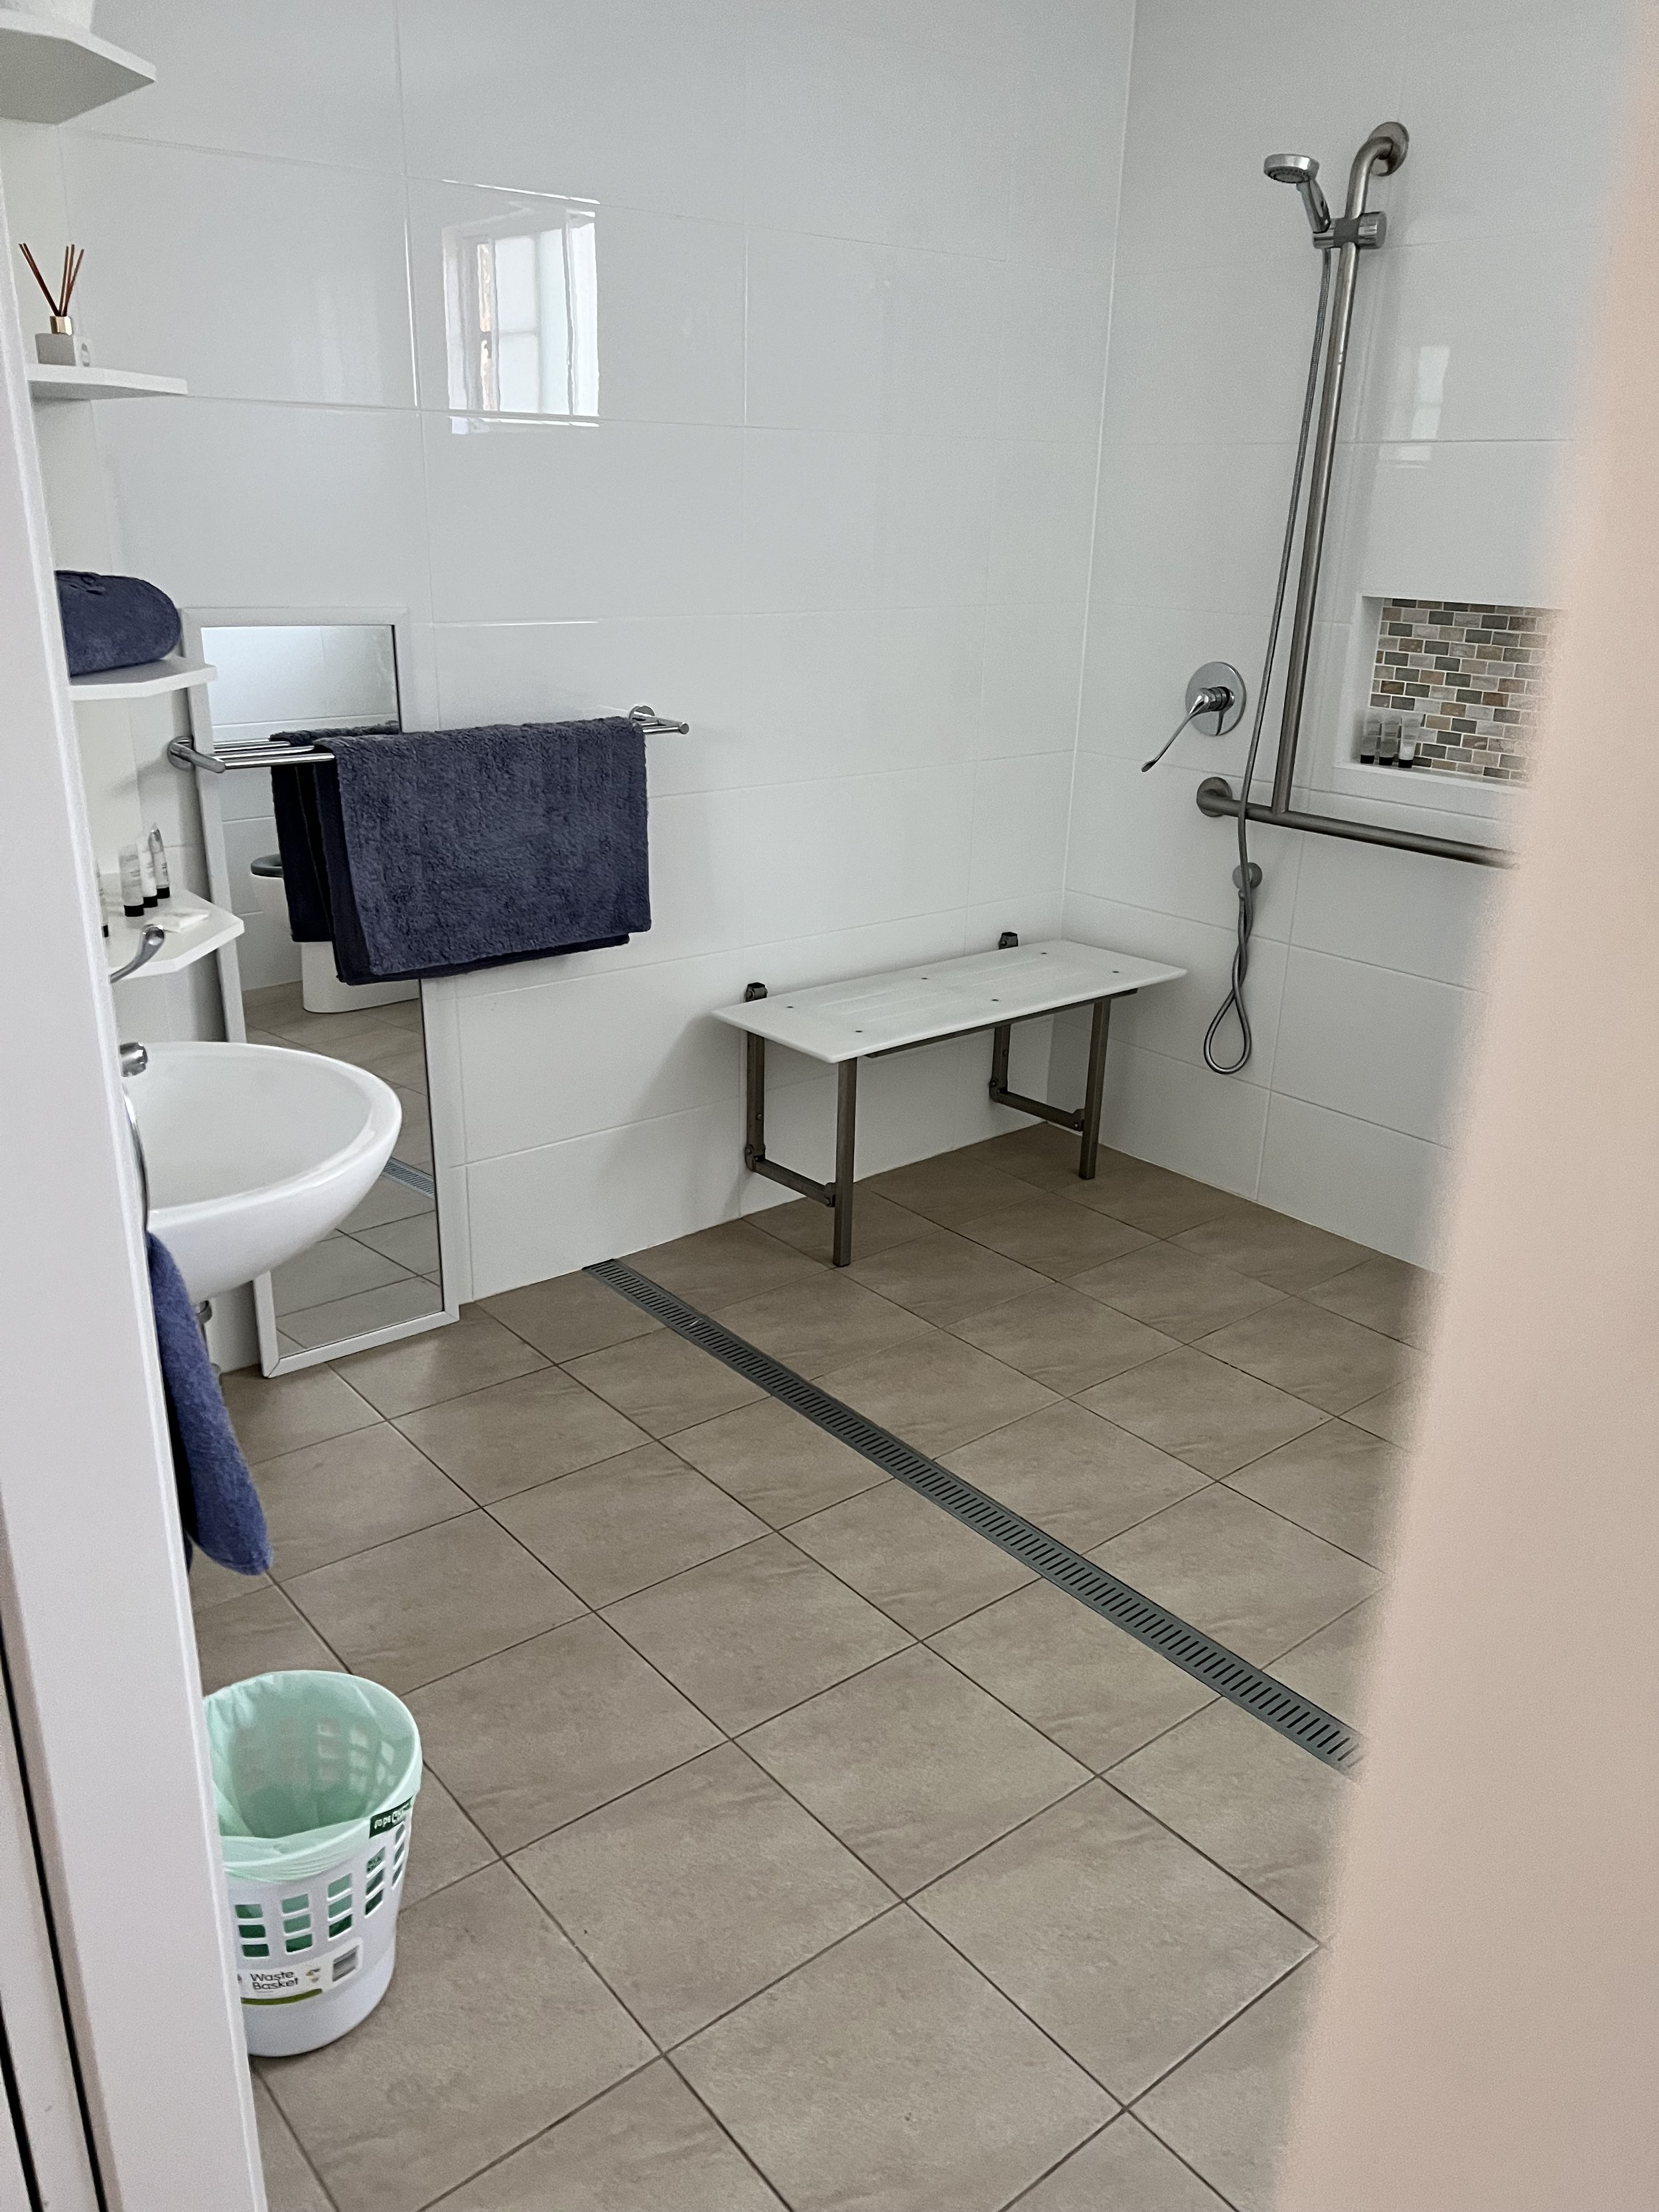 Accessible bathroom - the shower end